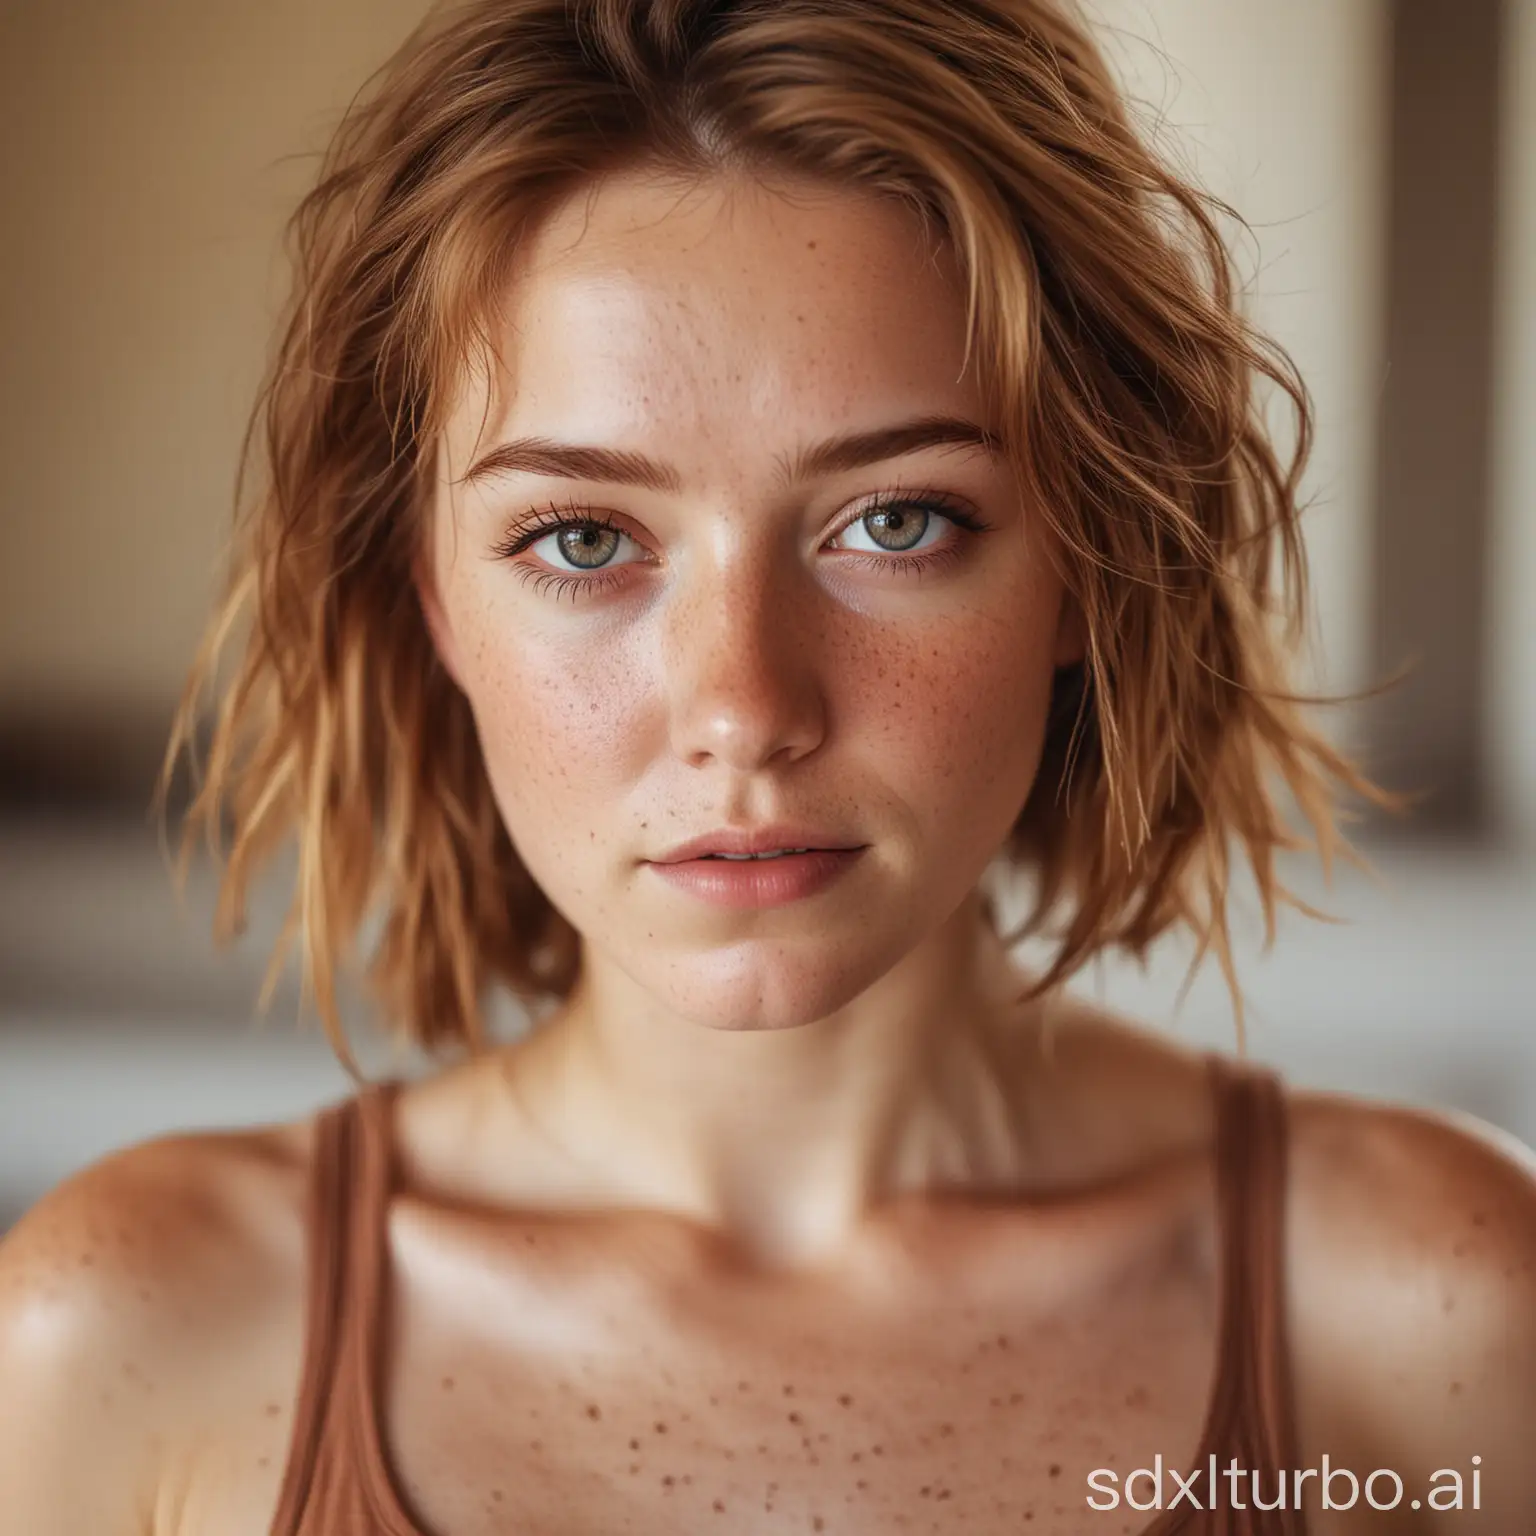 Closeup-Portrait-of-a-Woman-with-Freckles-and-Soft-Natural-Light